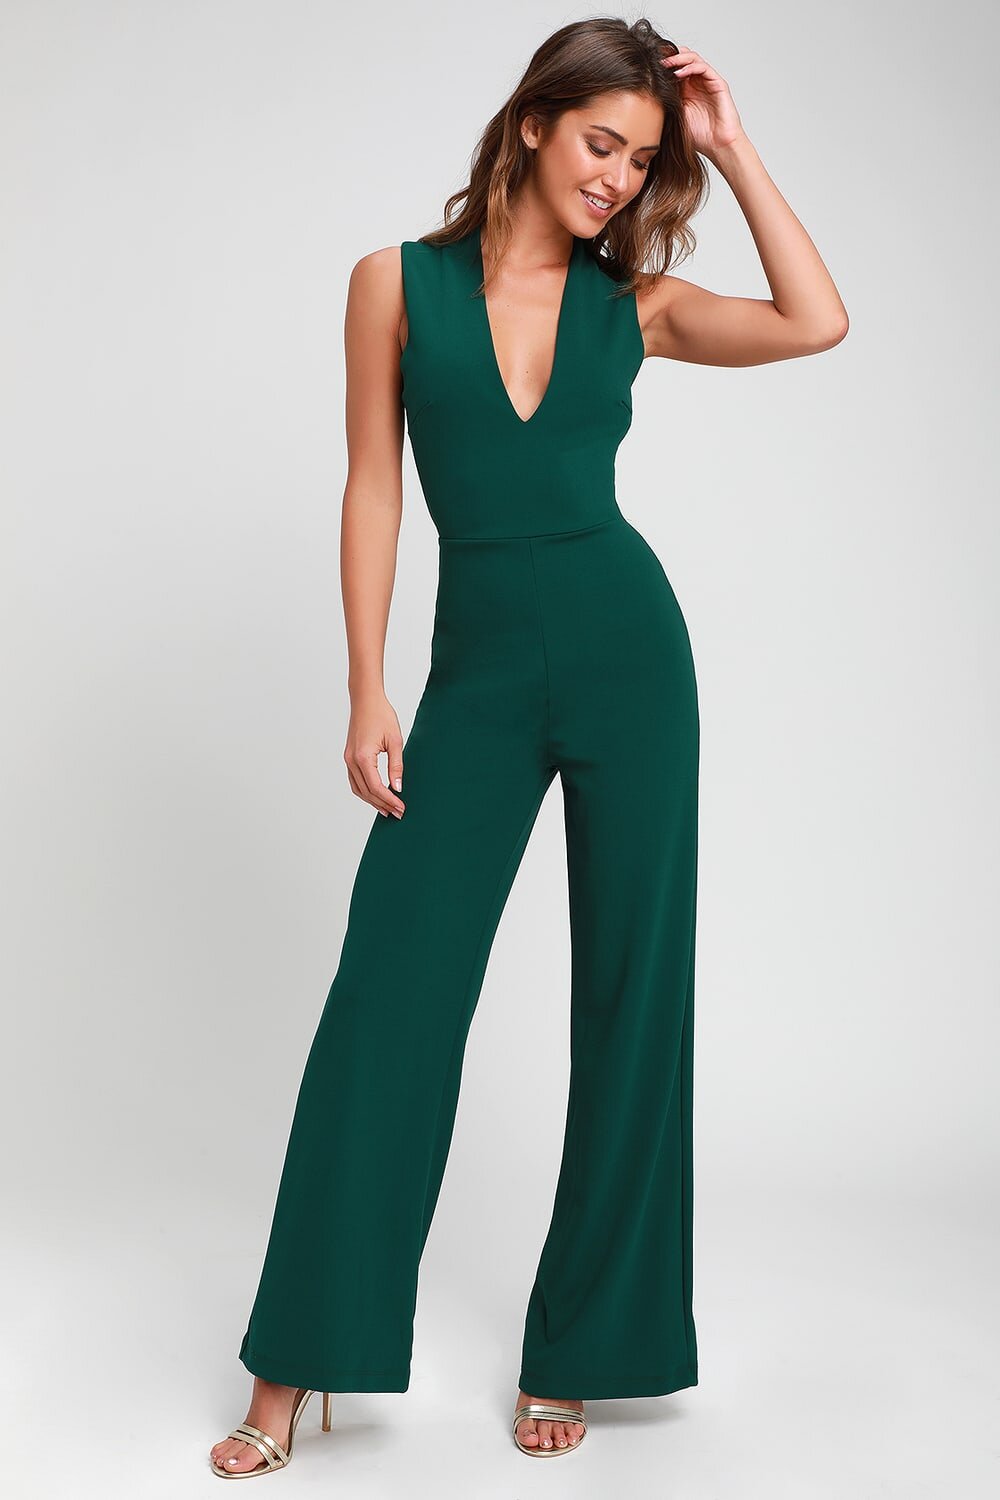 Lulu's Thinking Out Loud Hunter Green Backless Jumpsuit